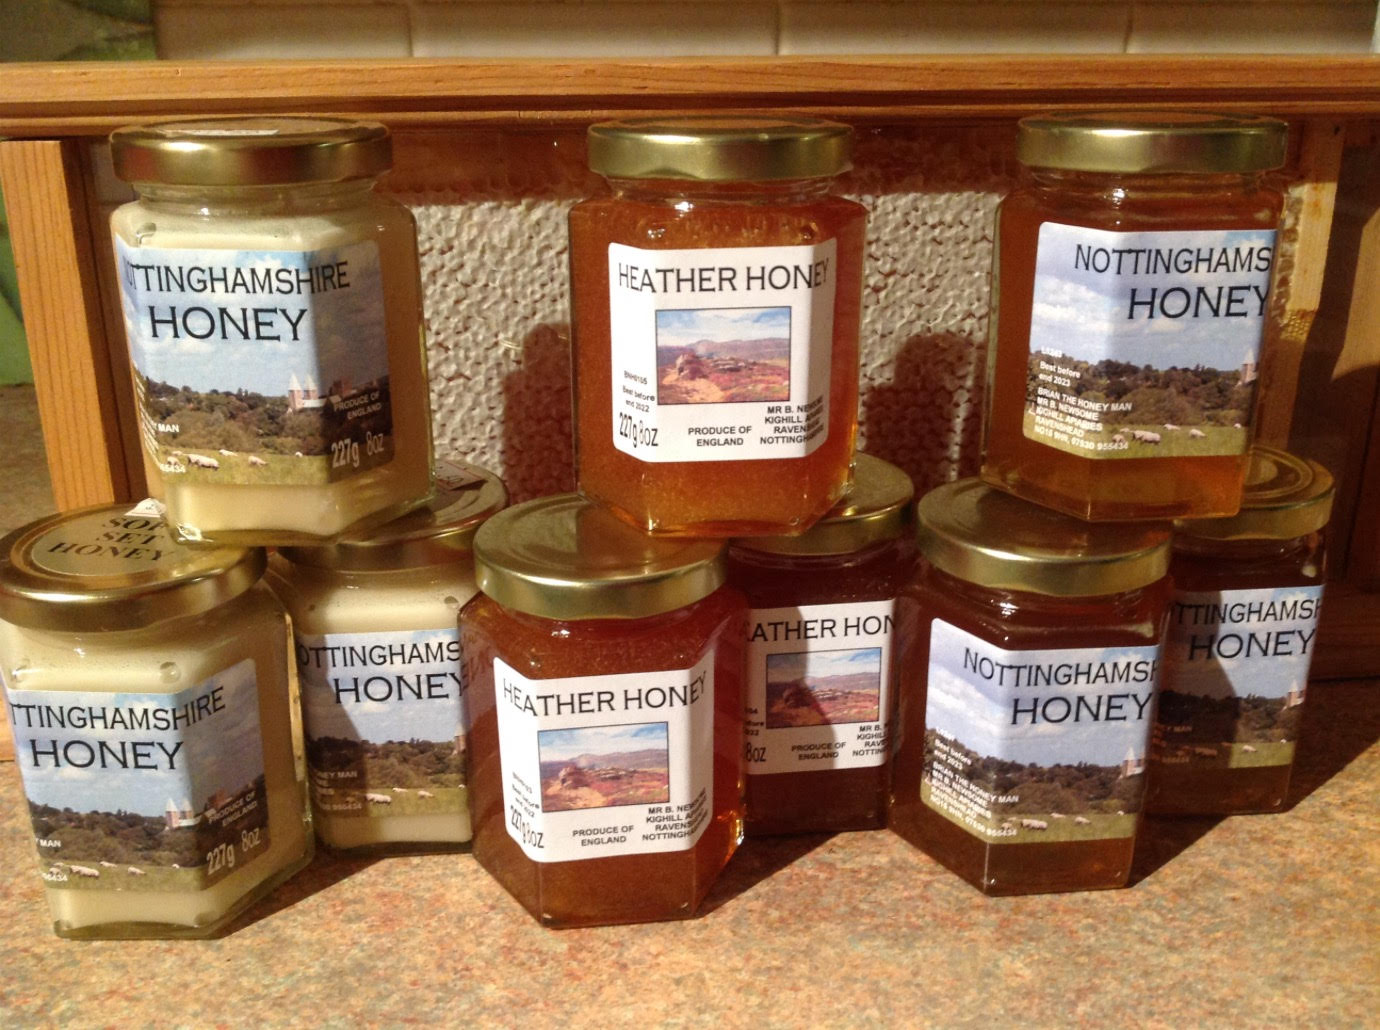 Nottinghamshire Honey and filtered wax